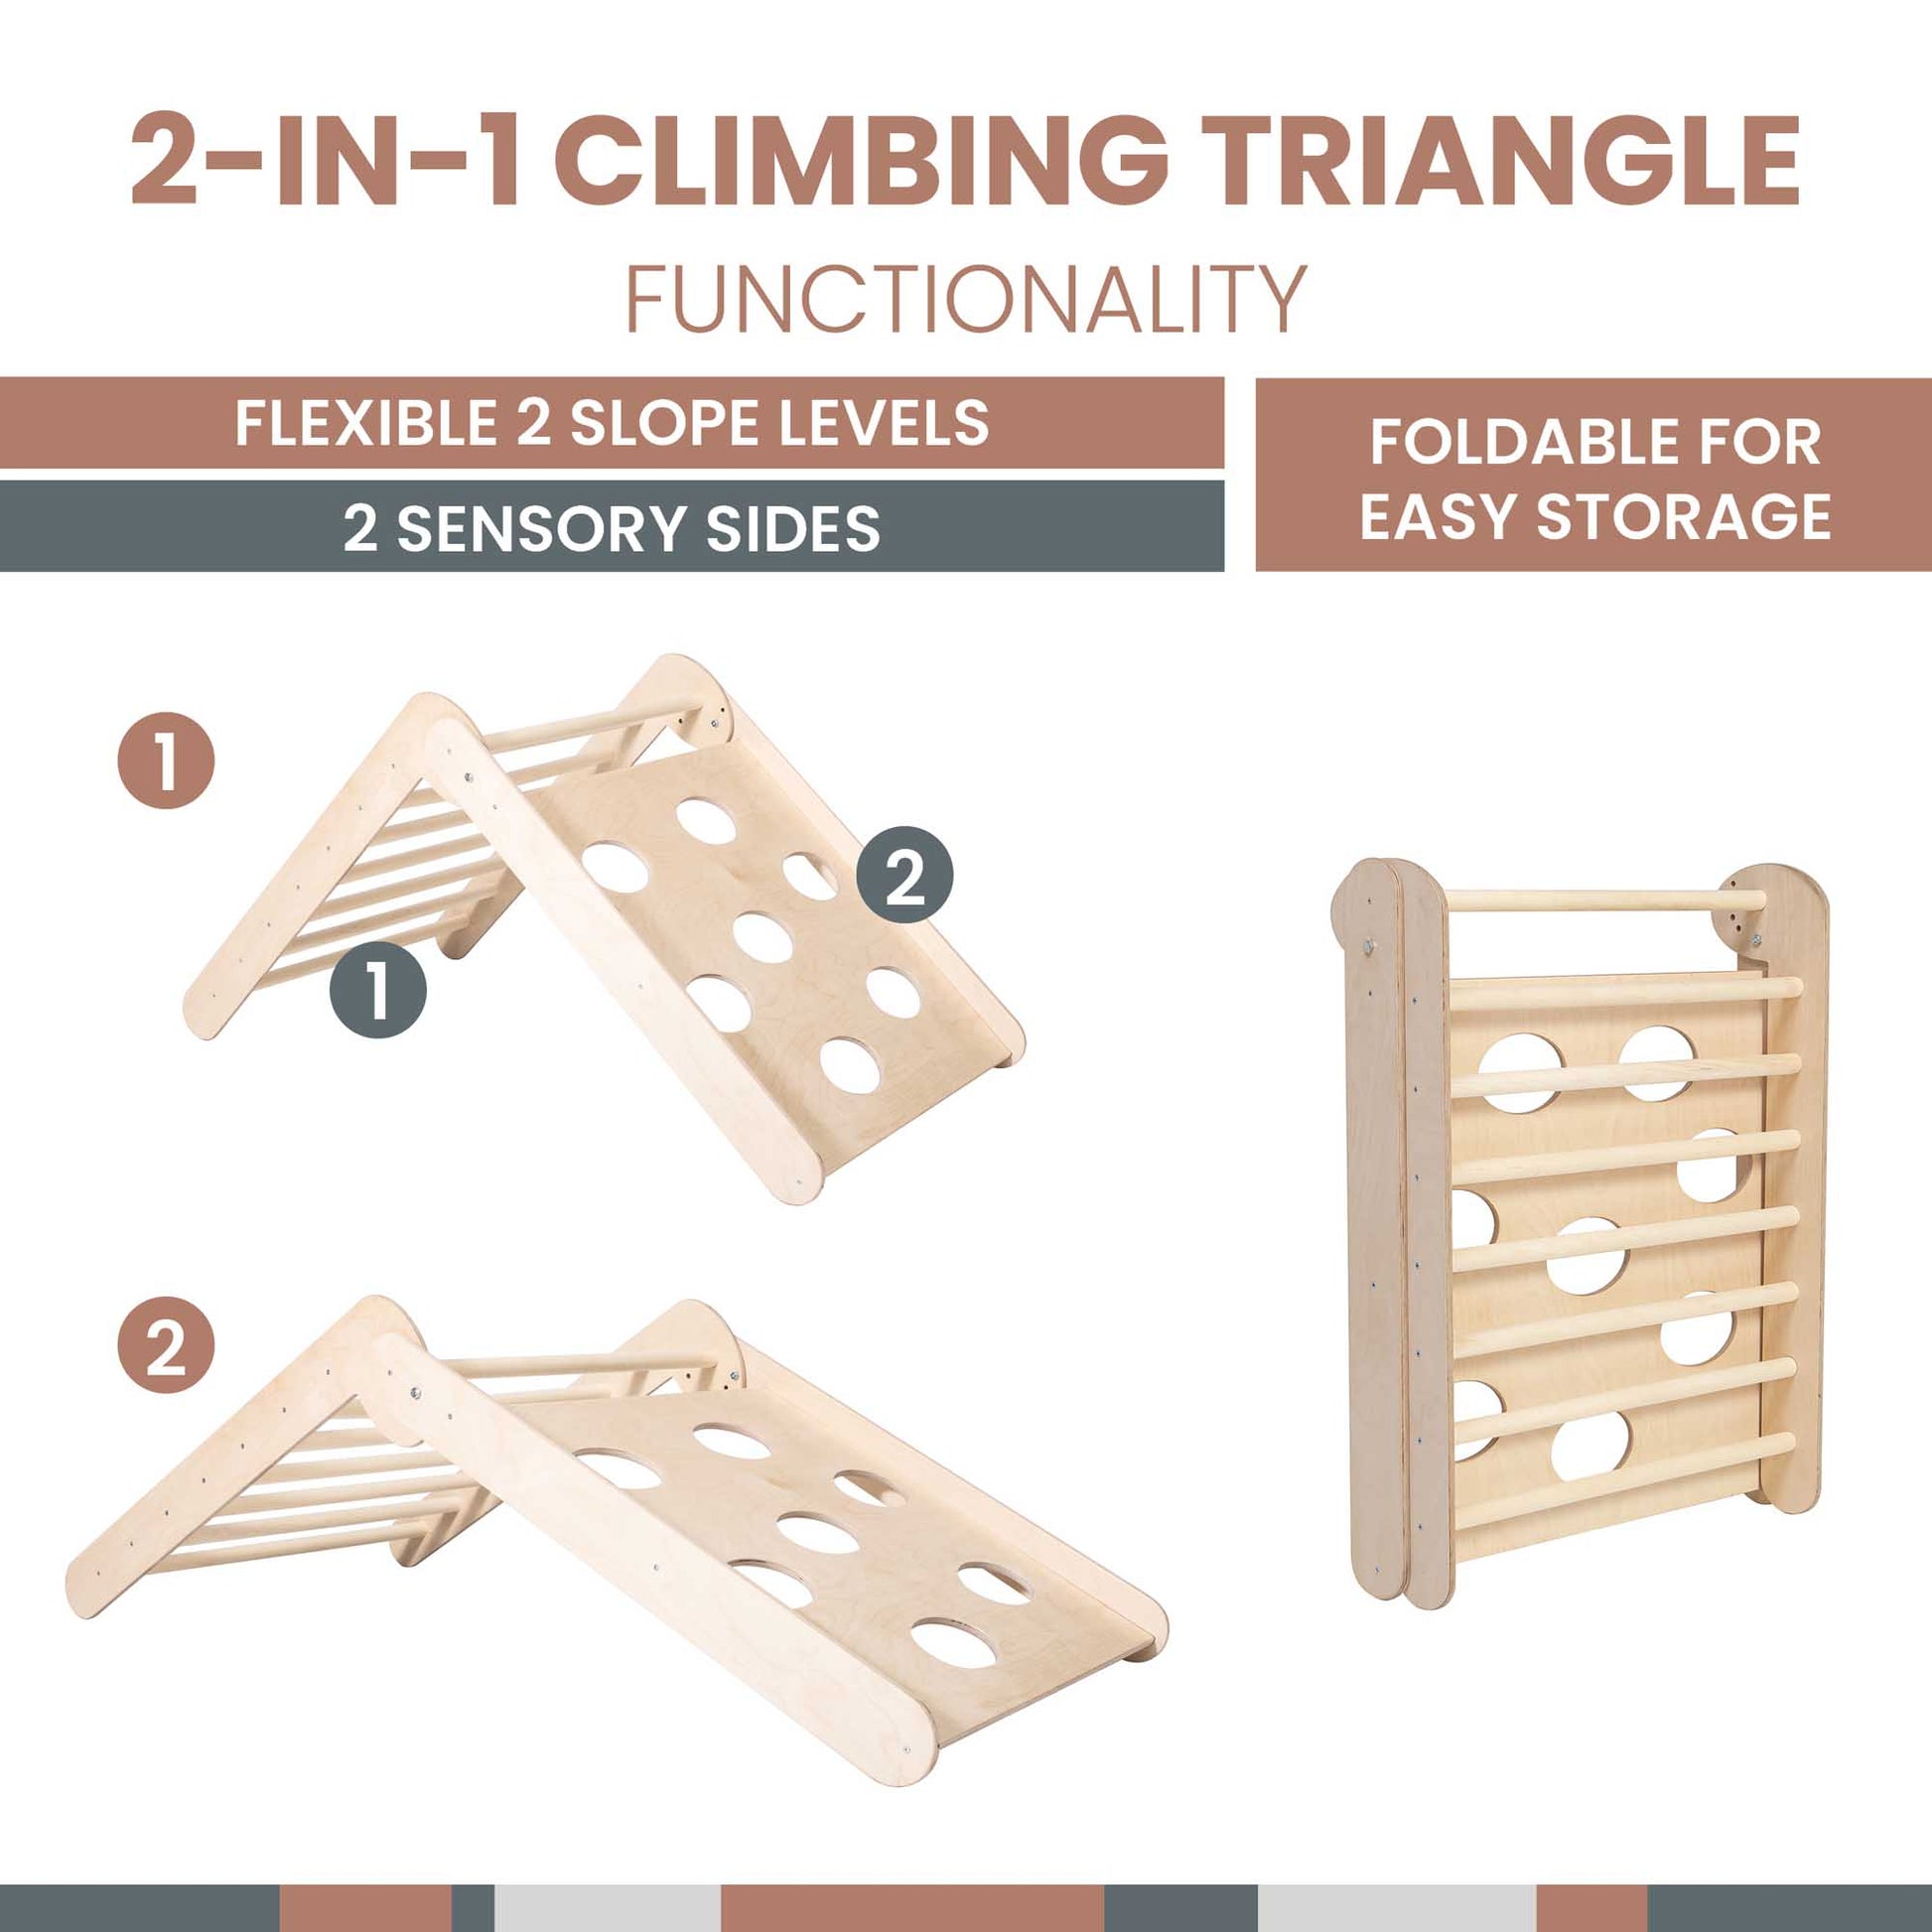 This Transformable climbing triangle + Foldable climbing triangle + a ramp is a versatile climbing set made of durable Baltic birch plywood. It provides hours of fun for children and can be easily stored when not in use.